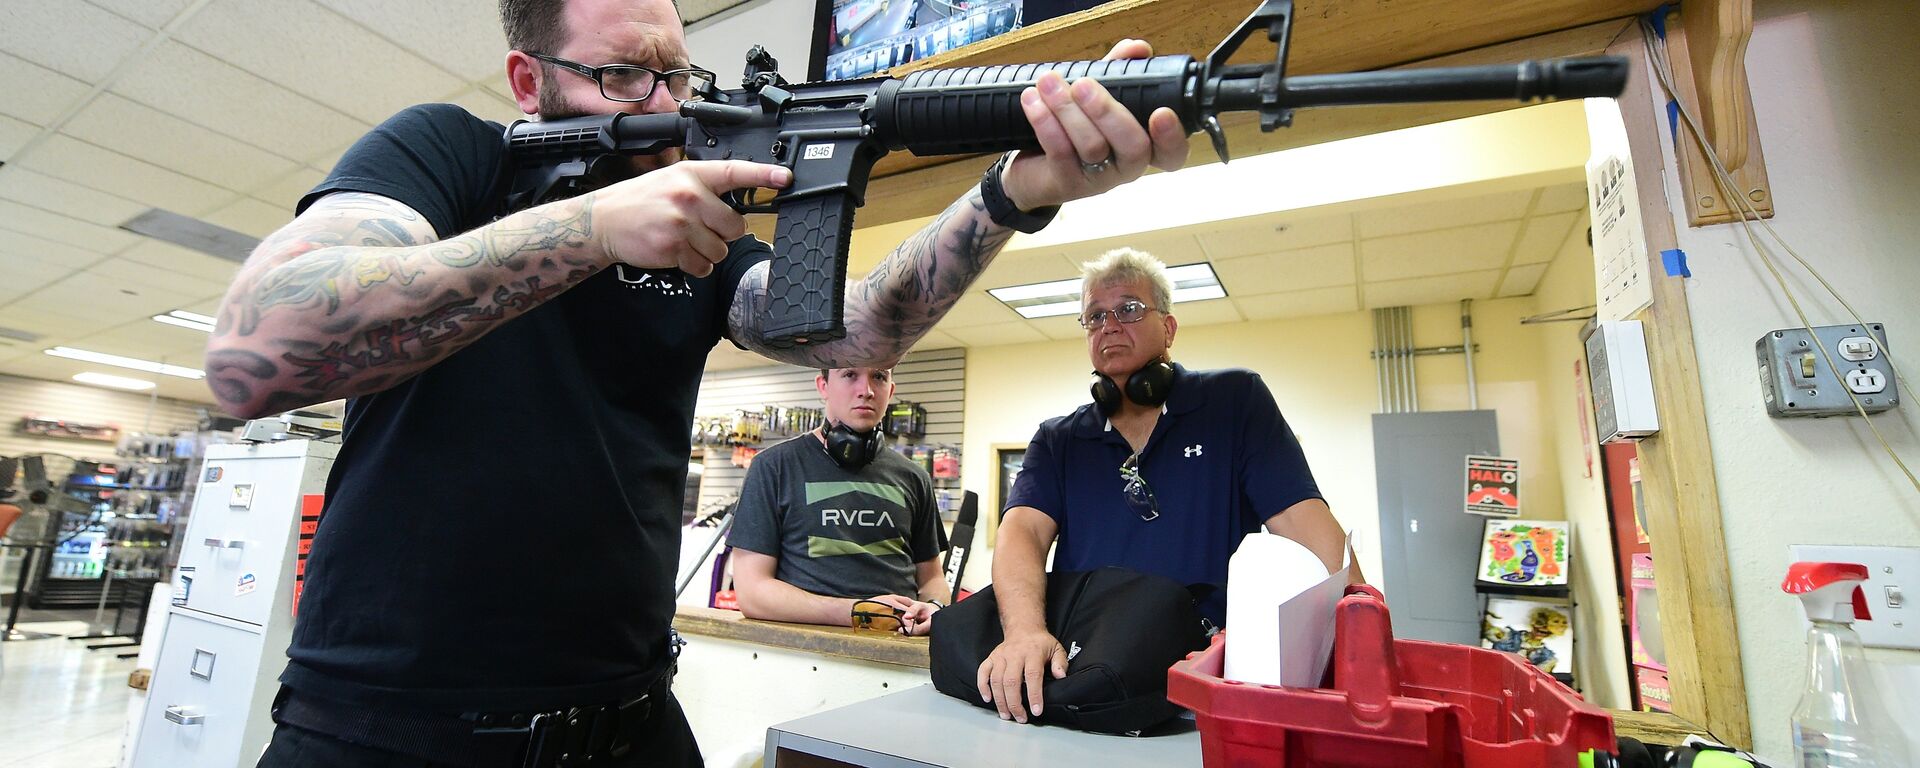 LAX Firing Range employee Tommy Bushnell demonstrates how to use an AR15 rifle to gun enthusiasts waiting to shoot at targets in Inglewood, California on September 7, 2016 - Sputnik International, 1920, 03.06.2022